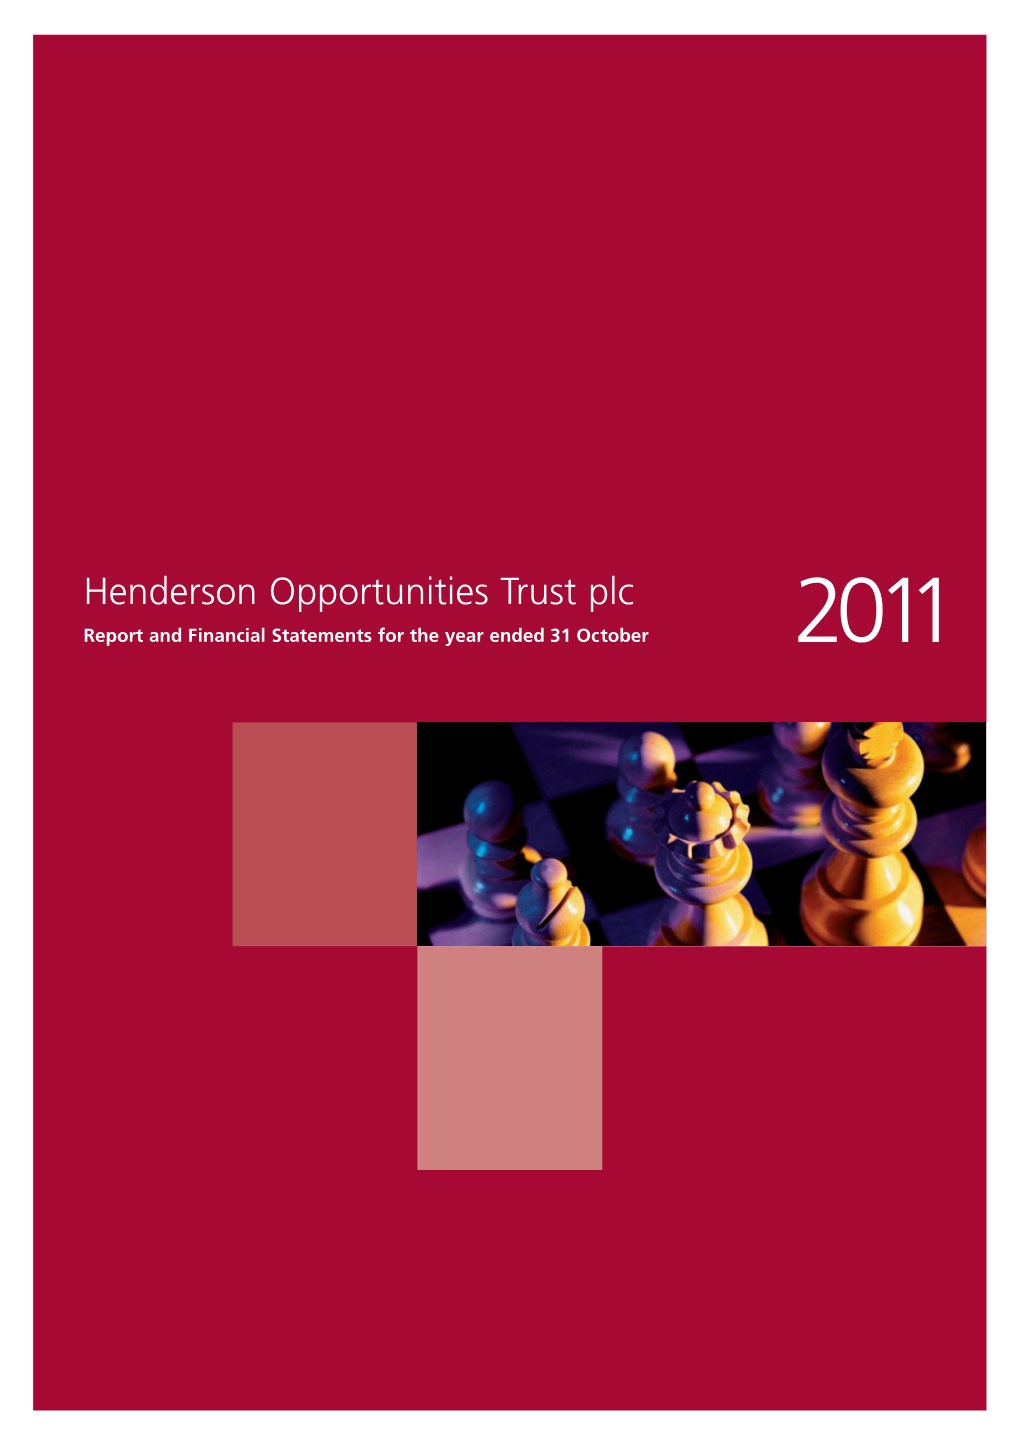 Henderson Opportunities Trust Plc – Report and Financial Statements for the Year Ended 31 October 2011 HGI9216/2011 HGI9216/2011 London Cert No